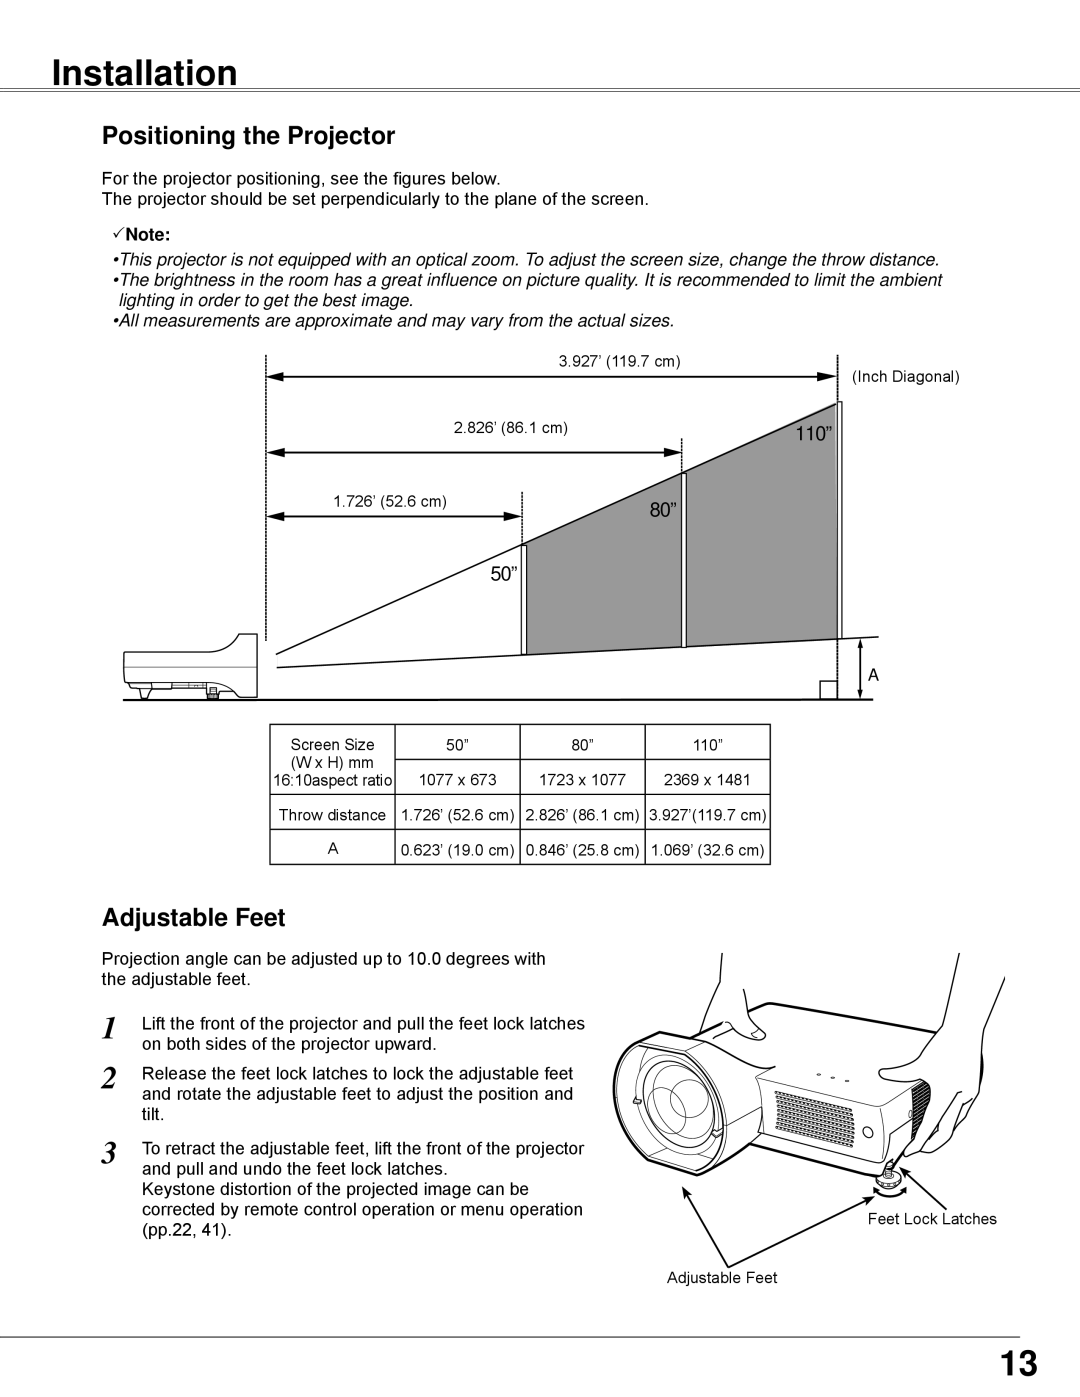 Sanyo PLC-WXE45 owner manual Installation, Positioning the Projector, Adjustable Feet, Note 